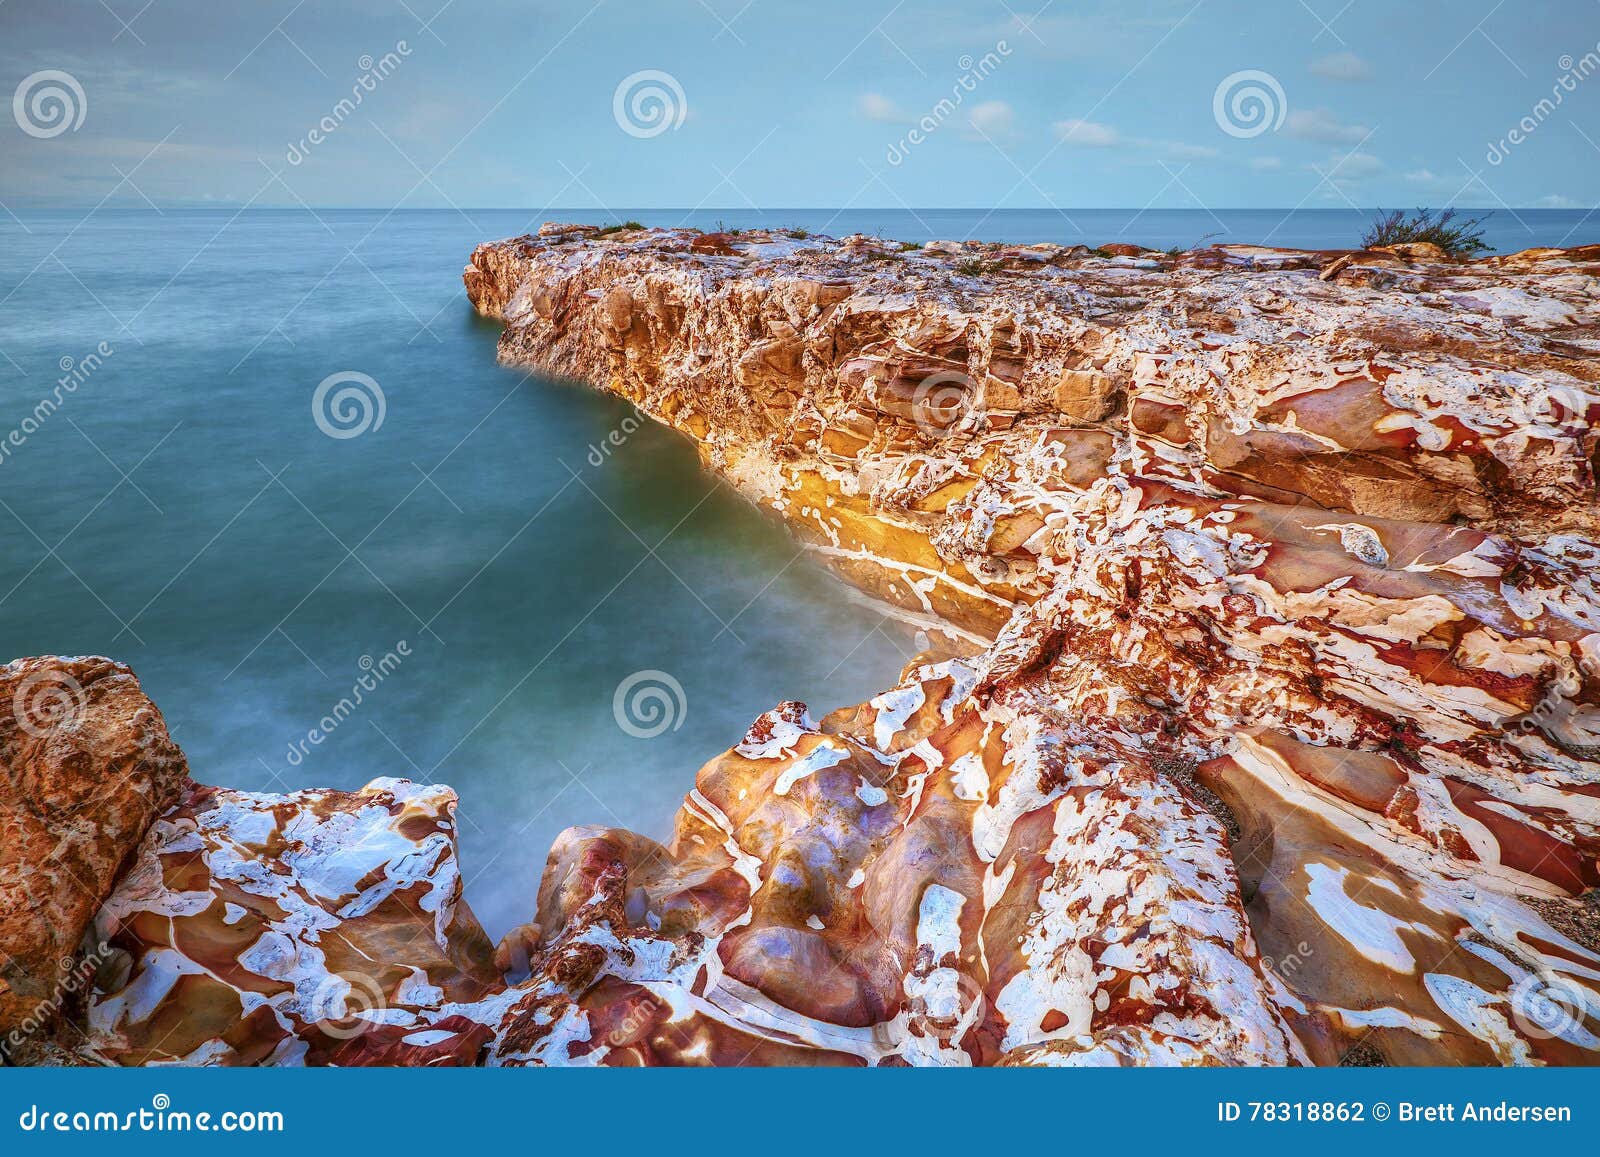 seascape - rocks with ocean view at nightcliff, northern territory, australia